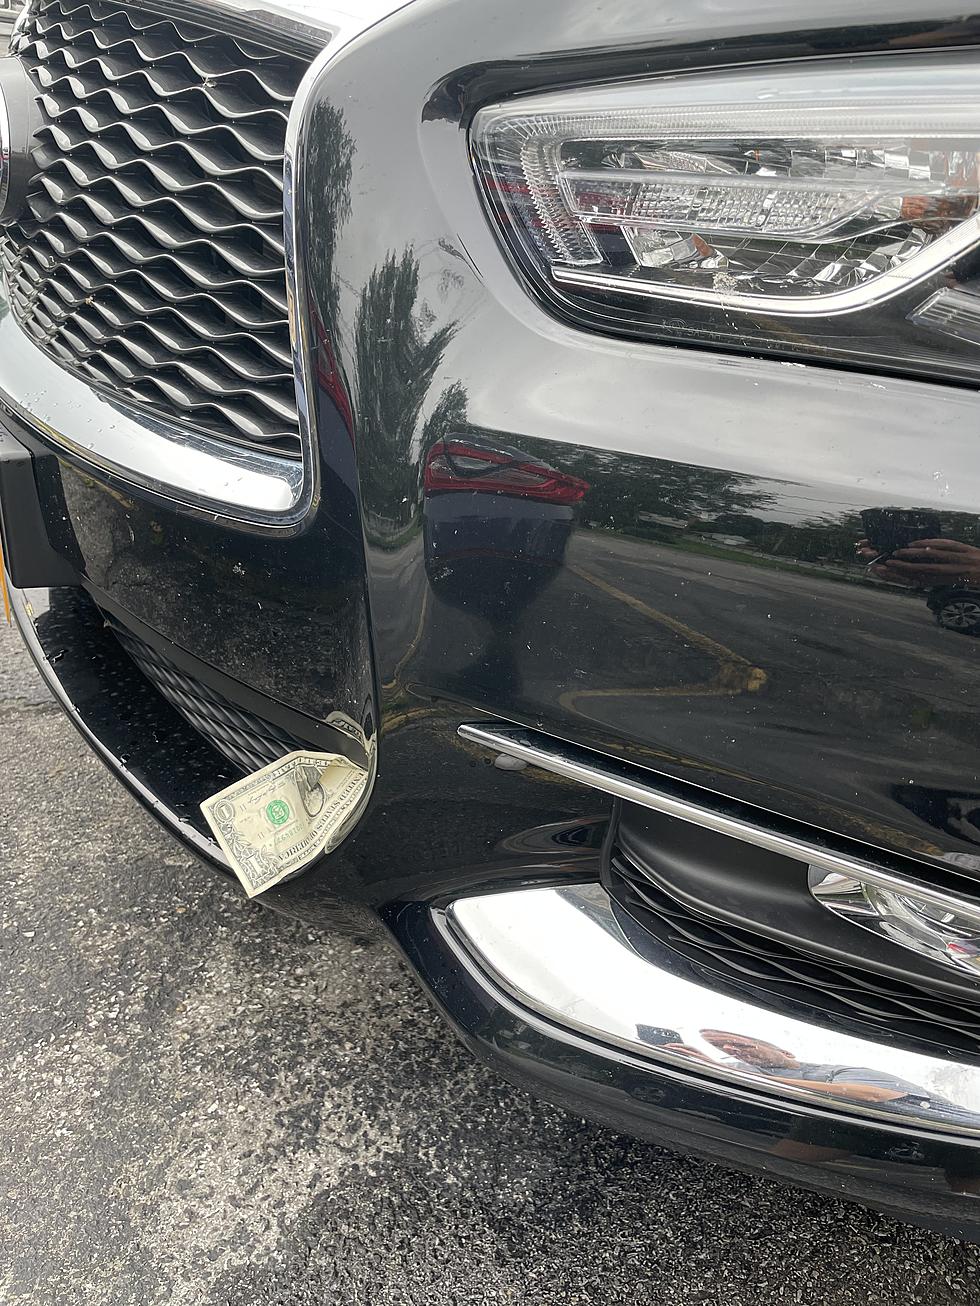 Warning: If You Find A Dollar Bill in Your Car Bumper in Newburgh, Don&#8217;t Take It!